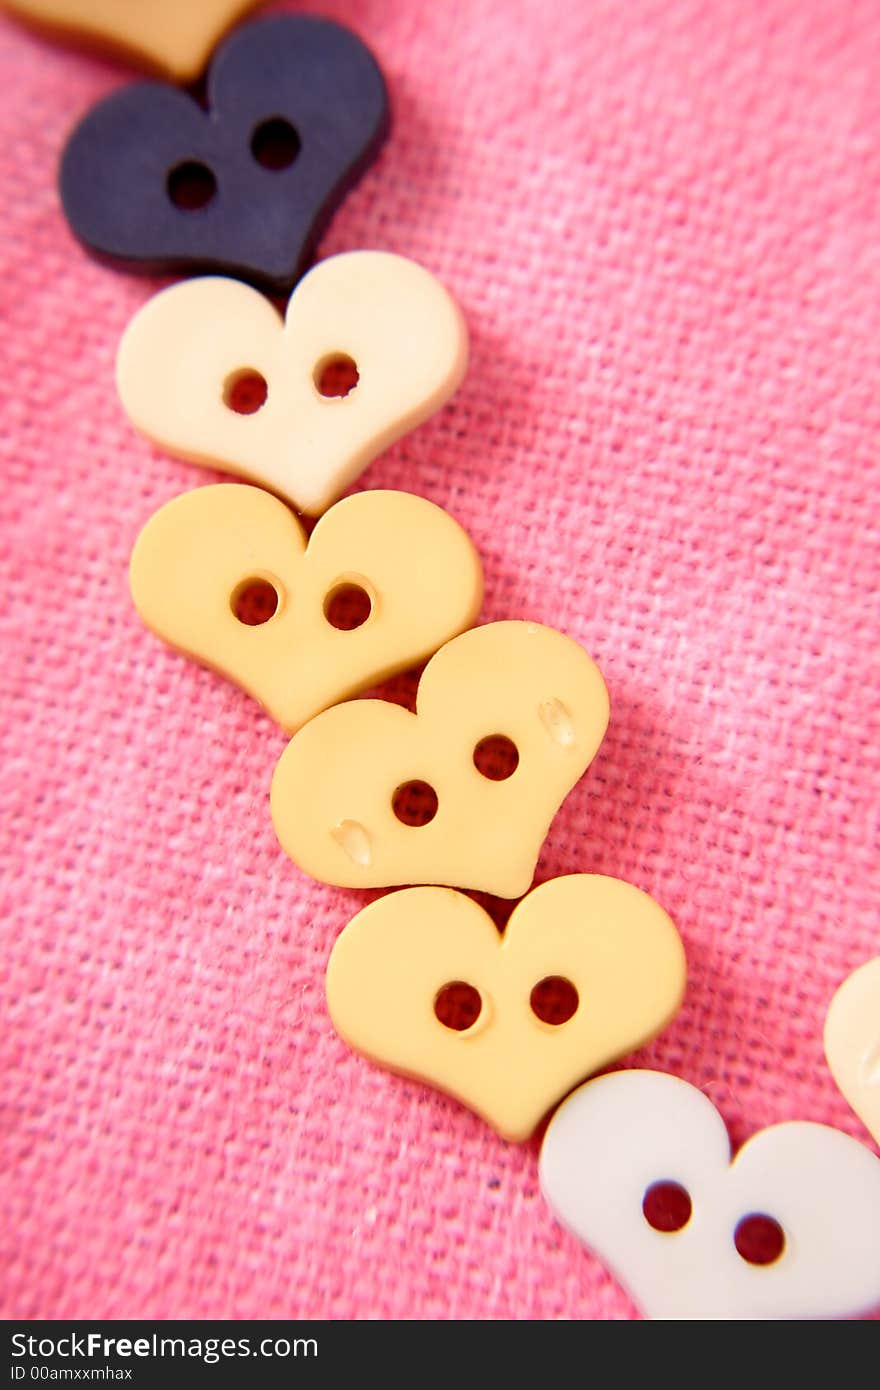 A line of buttons for Valentine's Day.  It seems like around Valentine's Day everything is shaped like hearts. A line of buttons for Valentine's Day.  It seems like around Valentine's Day everything is shaped like hearts.